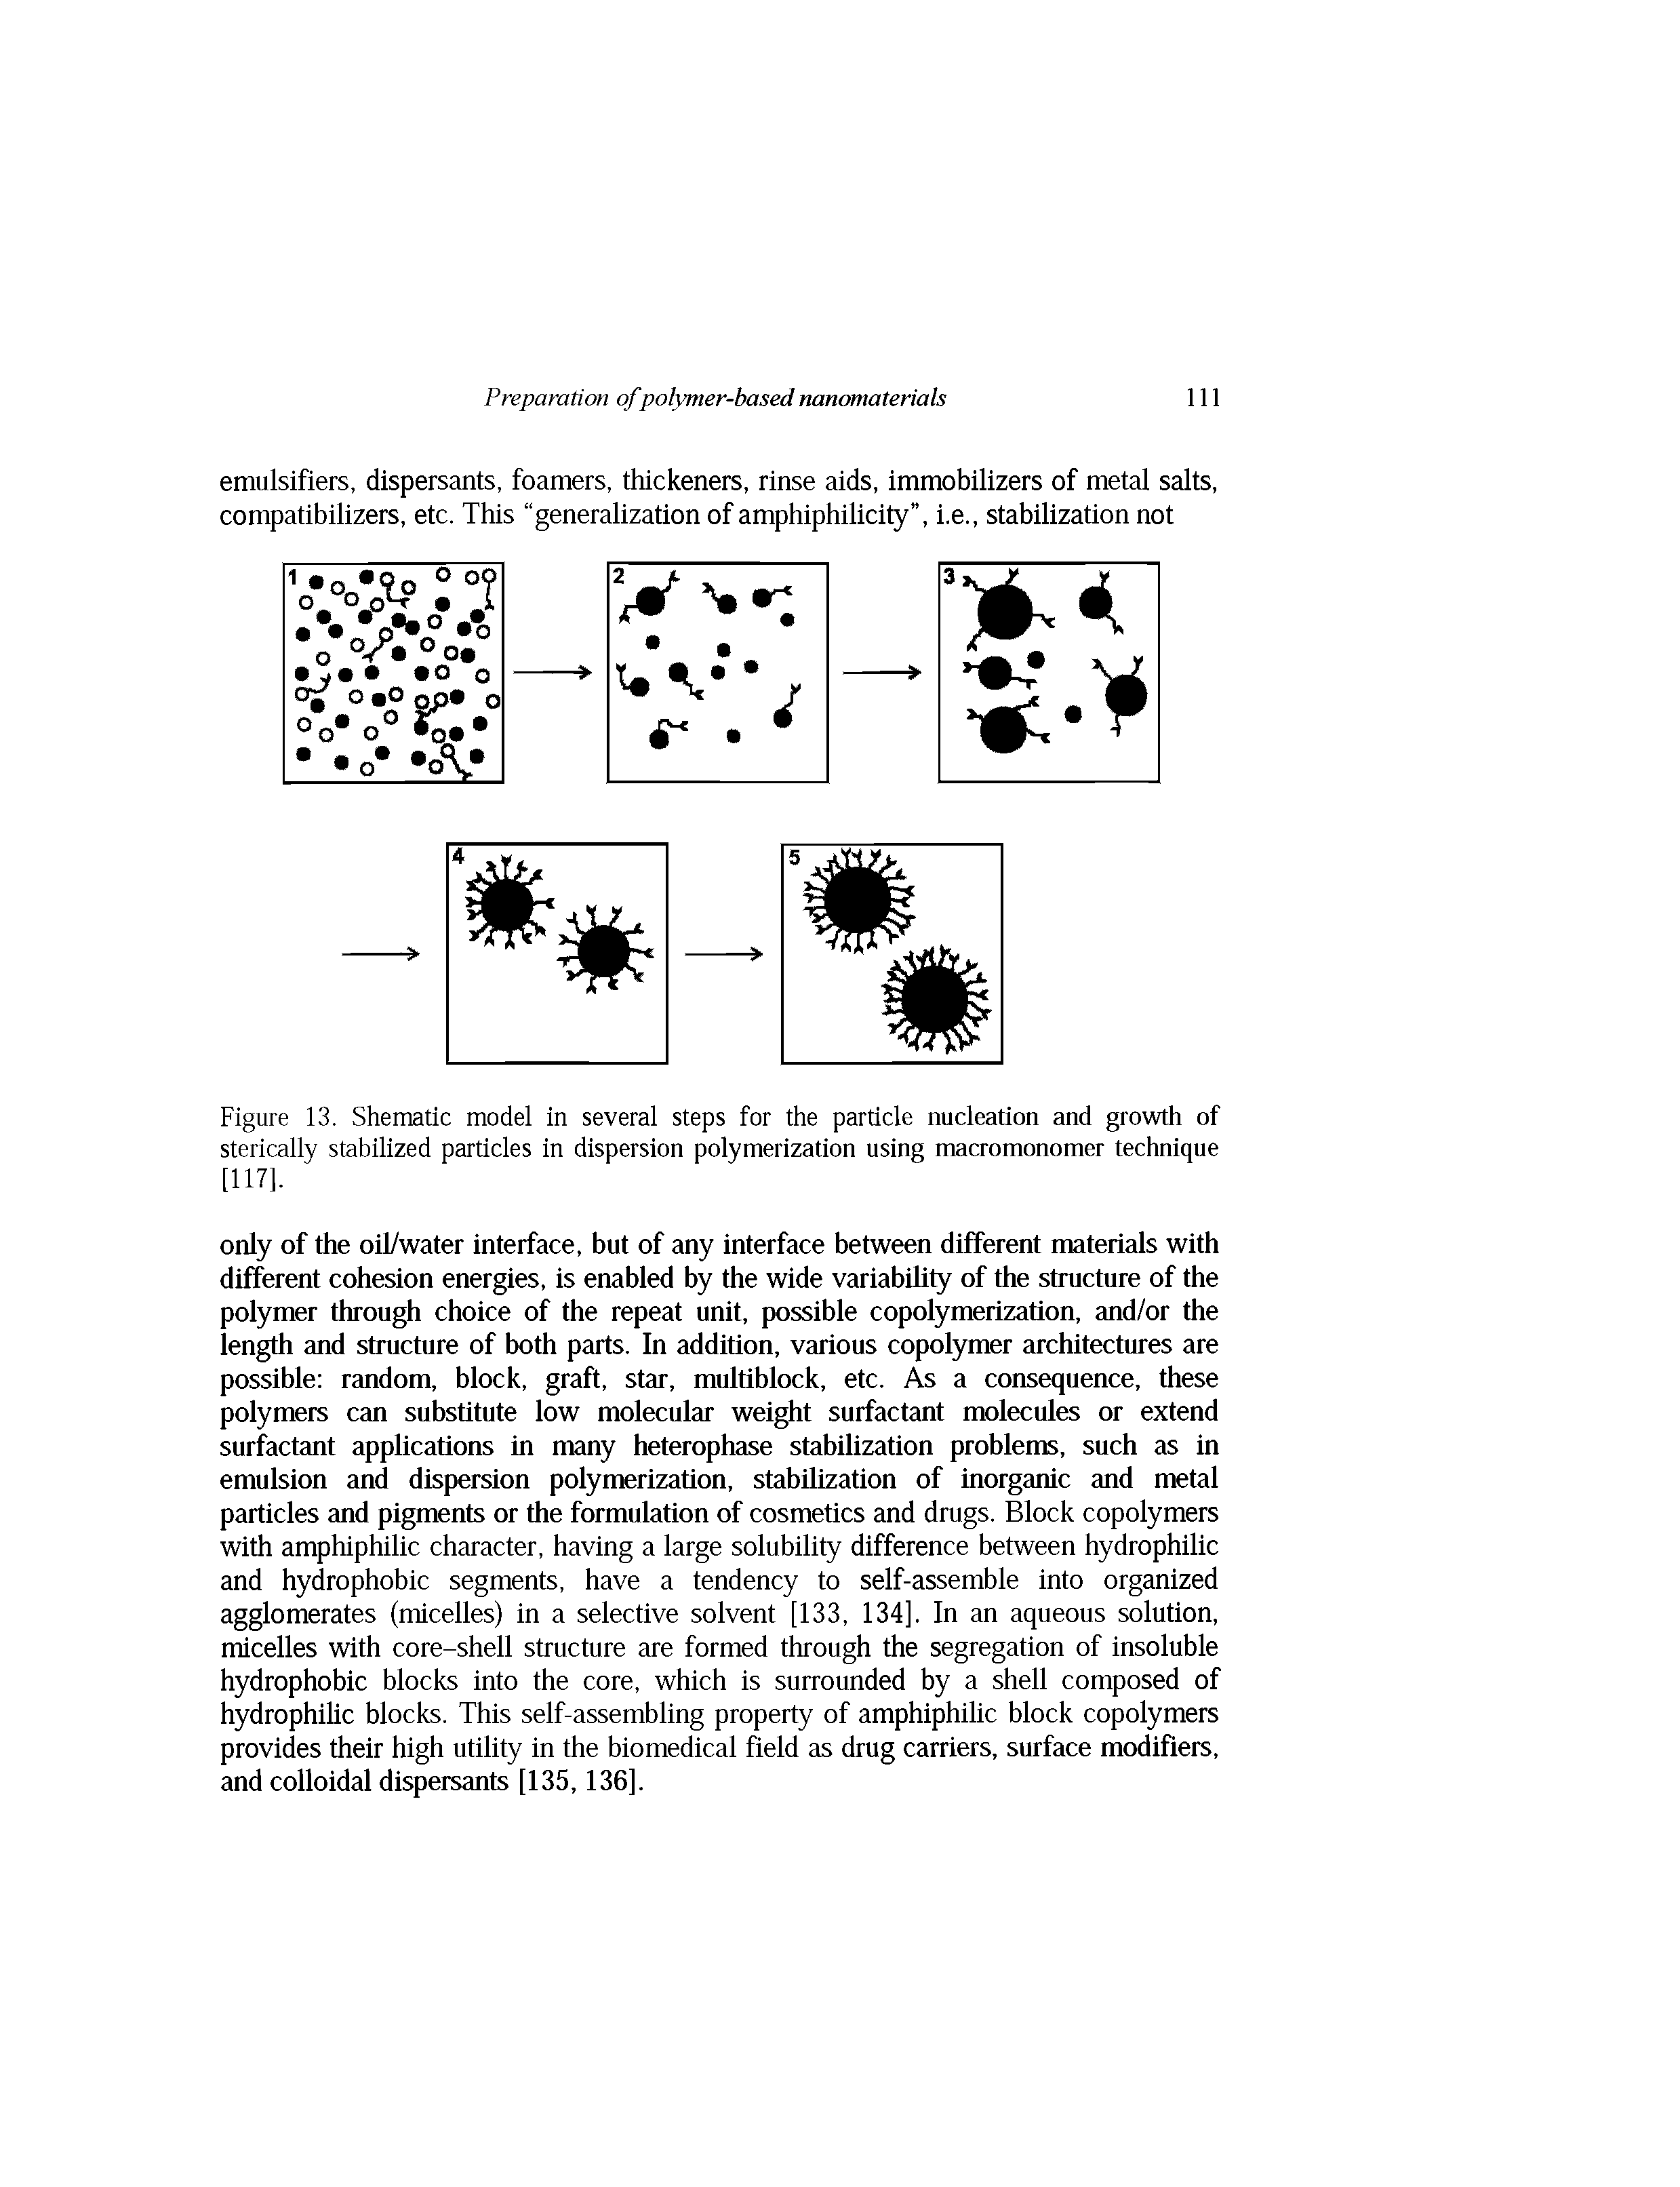 Figure 13. Shematic model in several steps for the particle nucleation and growth of sterically stabilized particles in dispersion polymerization using macromonomer technique [117].